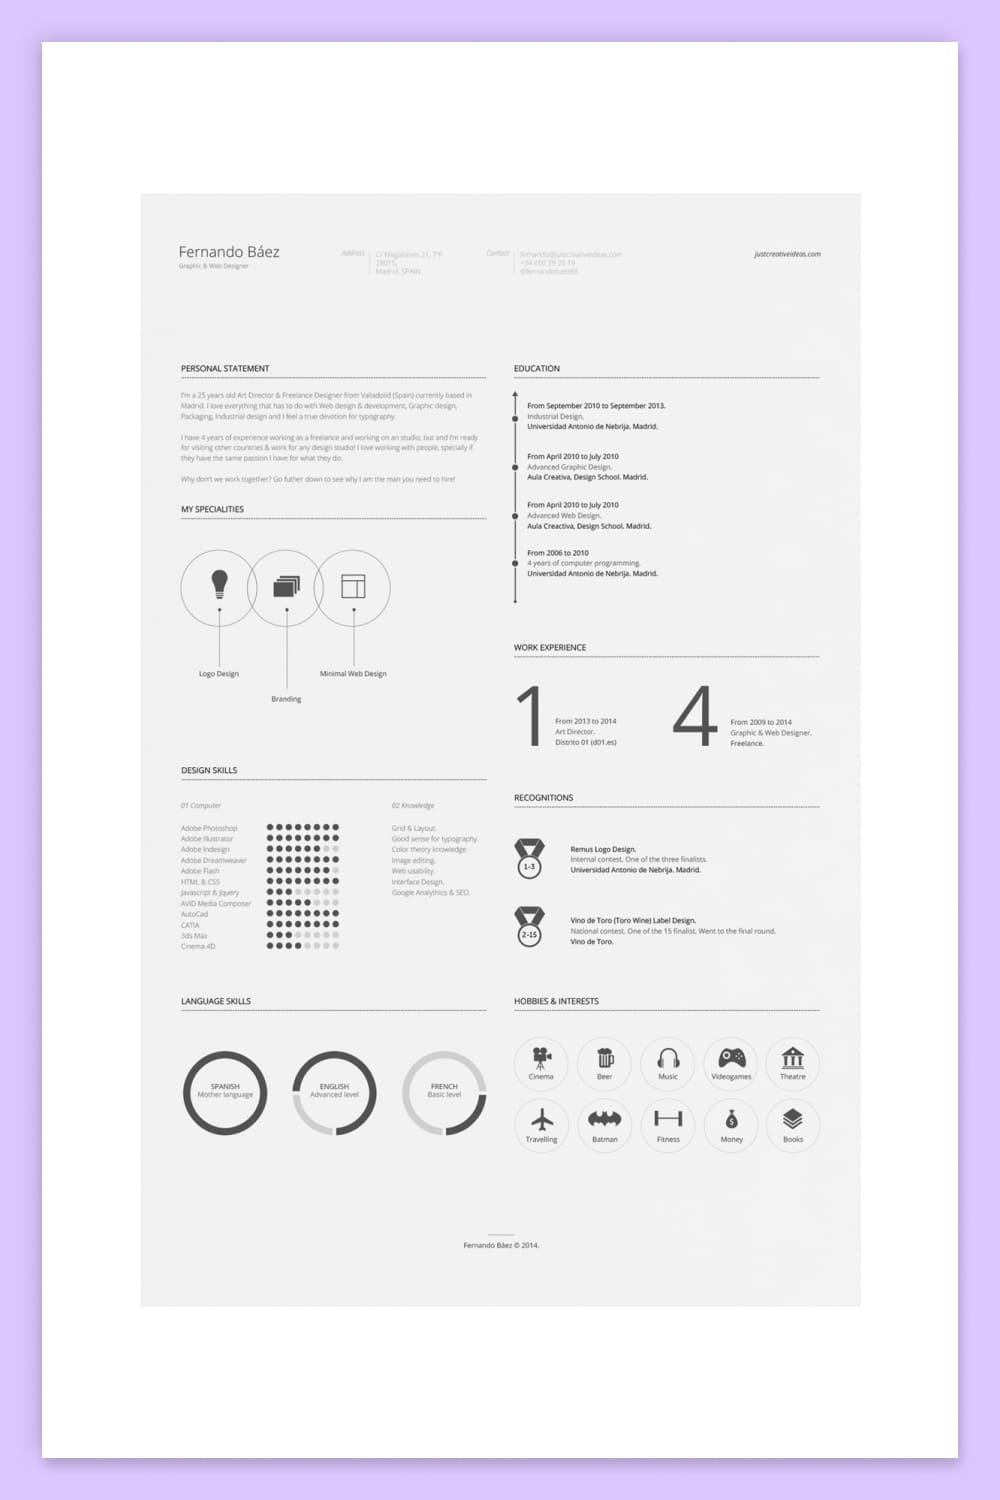 A well organized, eye-catching, and voguish resume template.